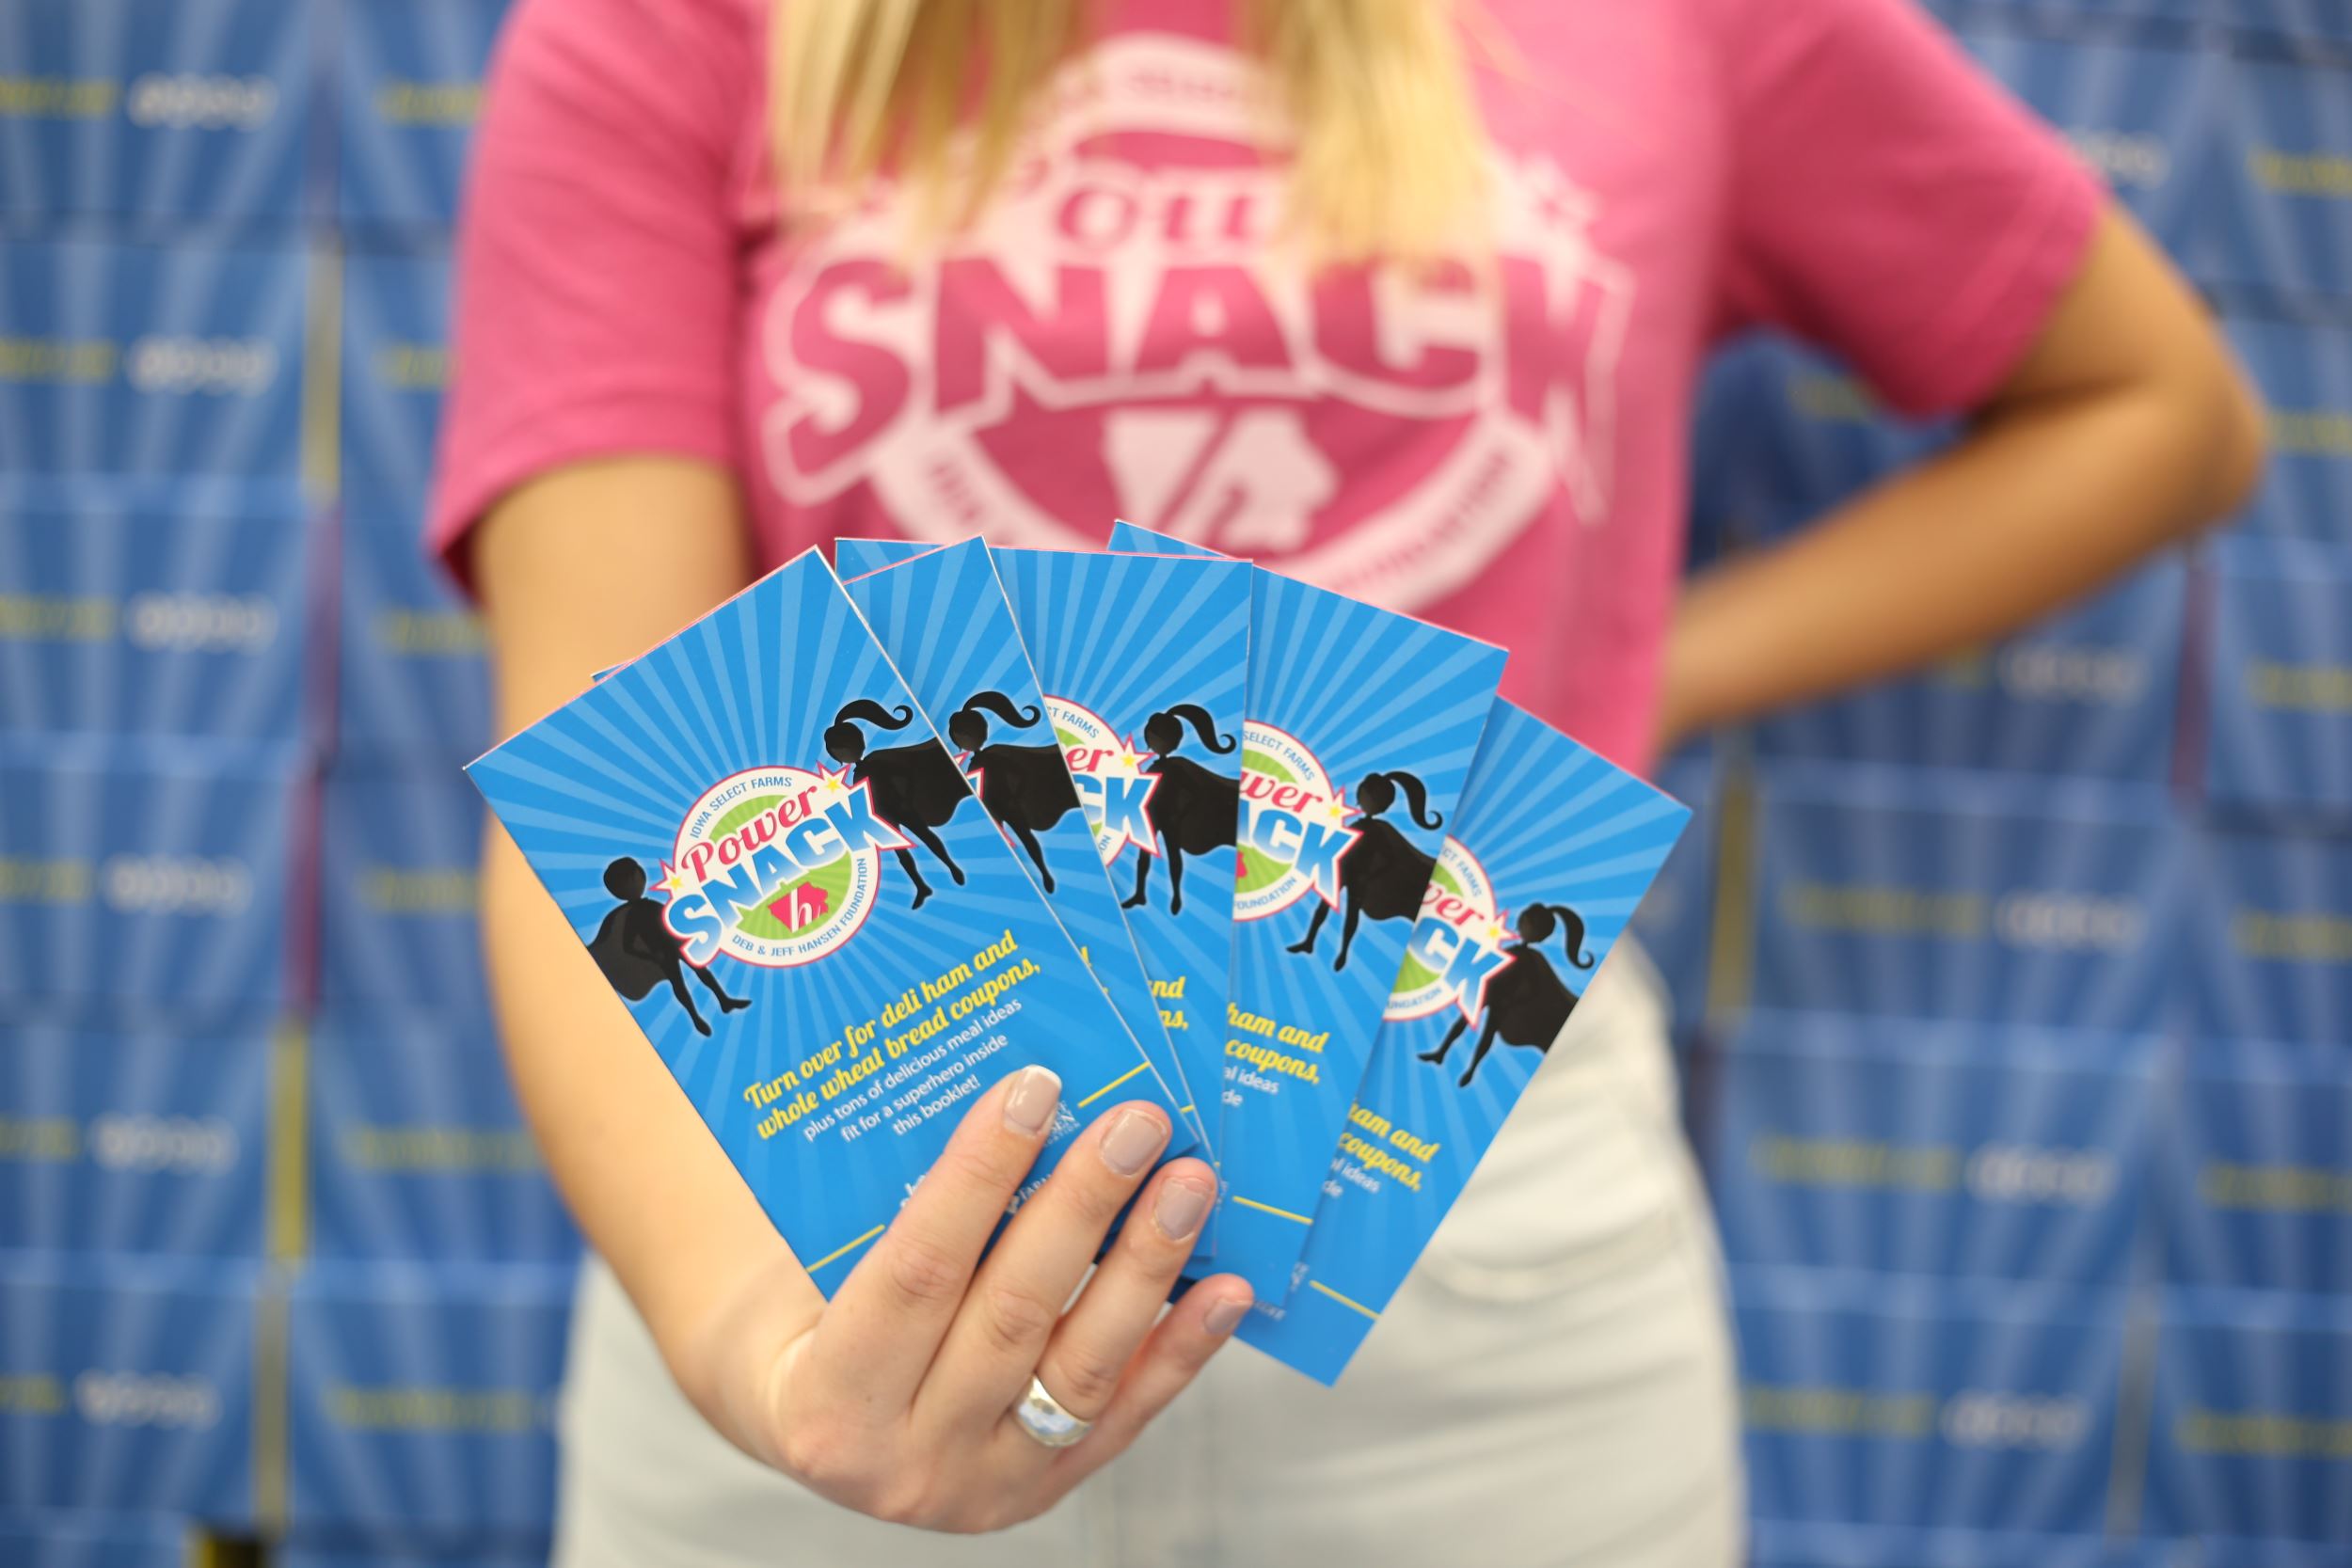 A handful of Powersnack coupon booklets